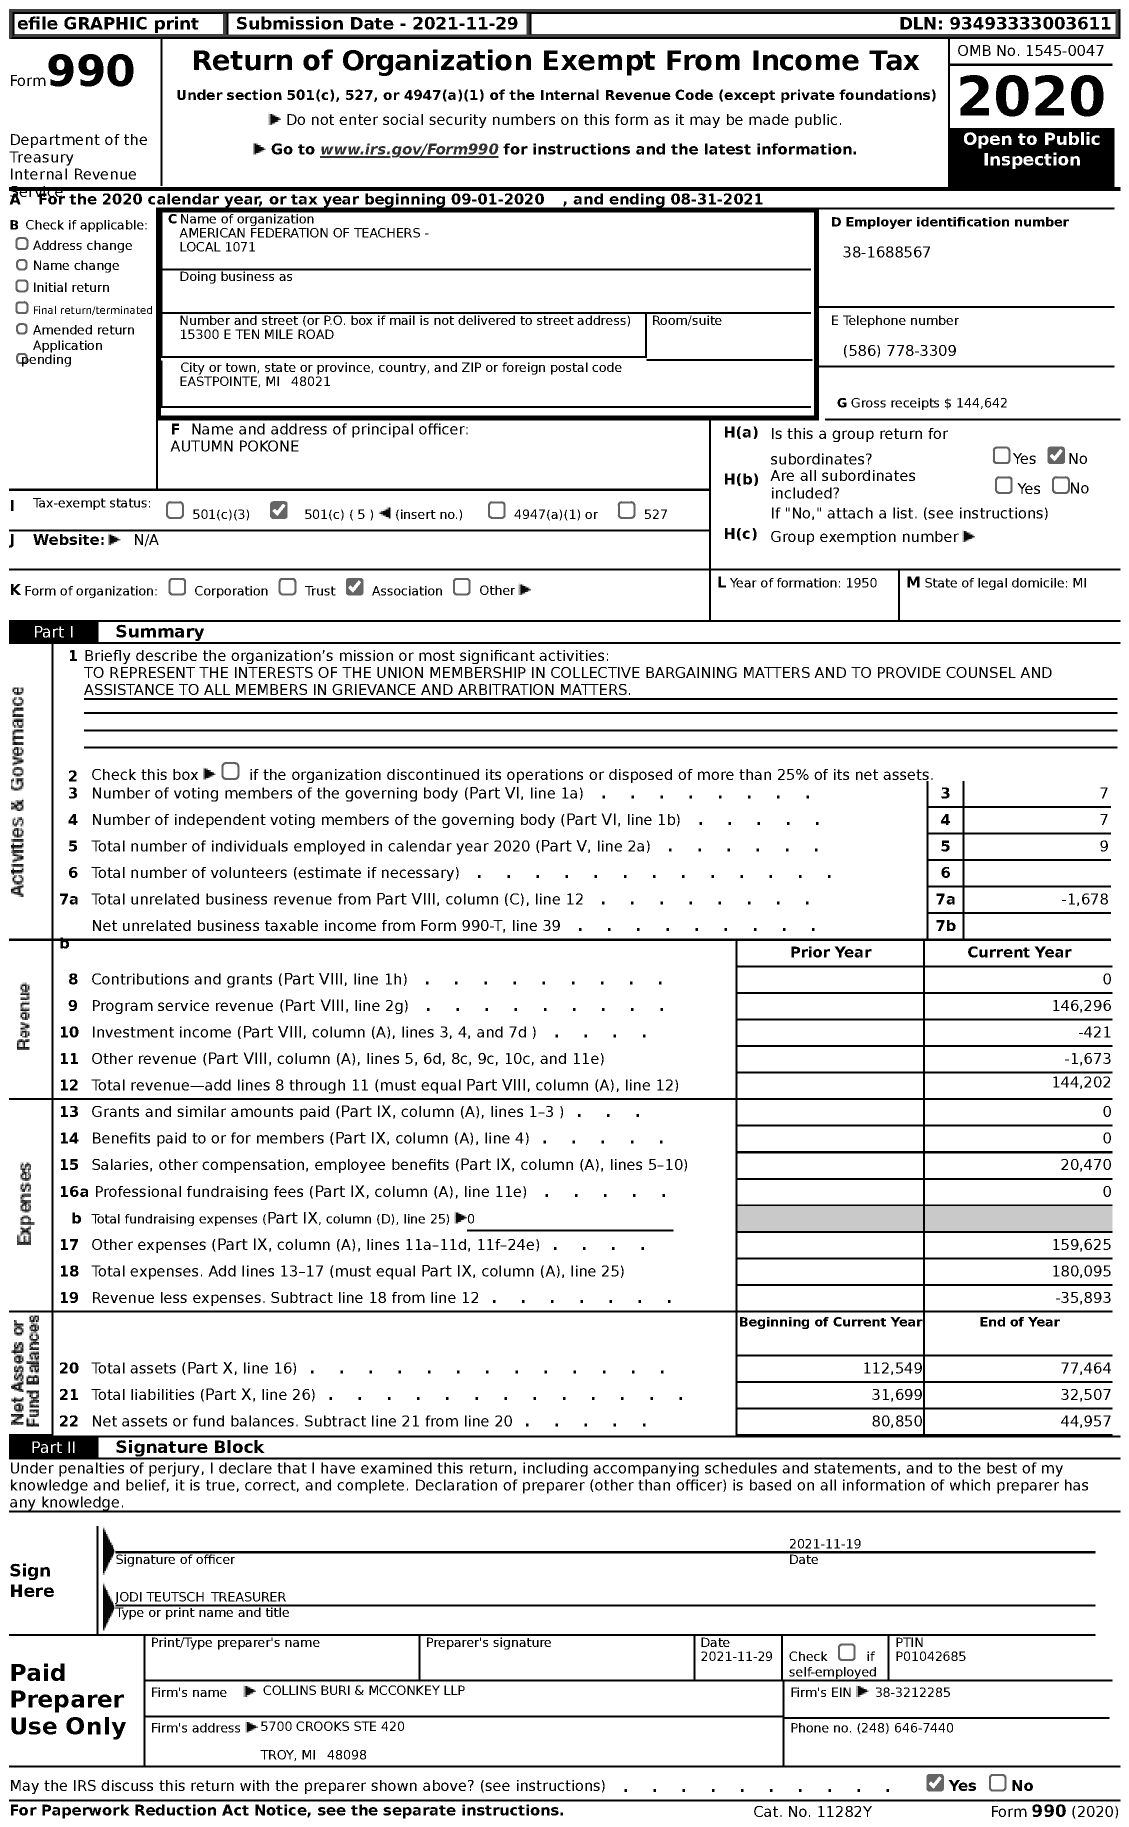 Image of first page of 2020 Form 990 for American Federation of Teachers - 1071 Roseville Aft